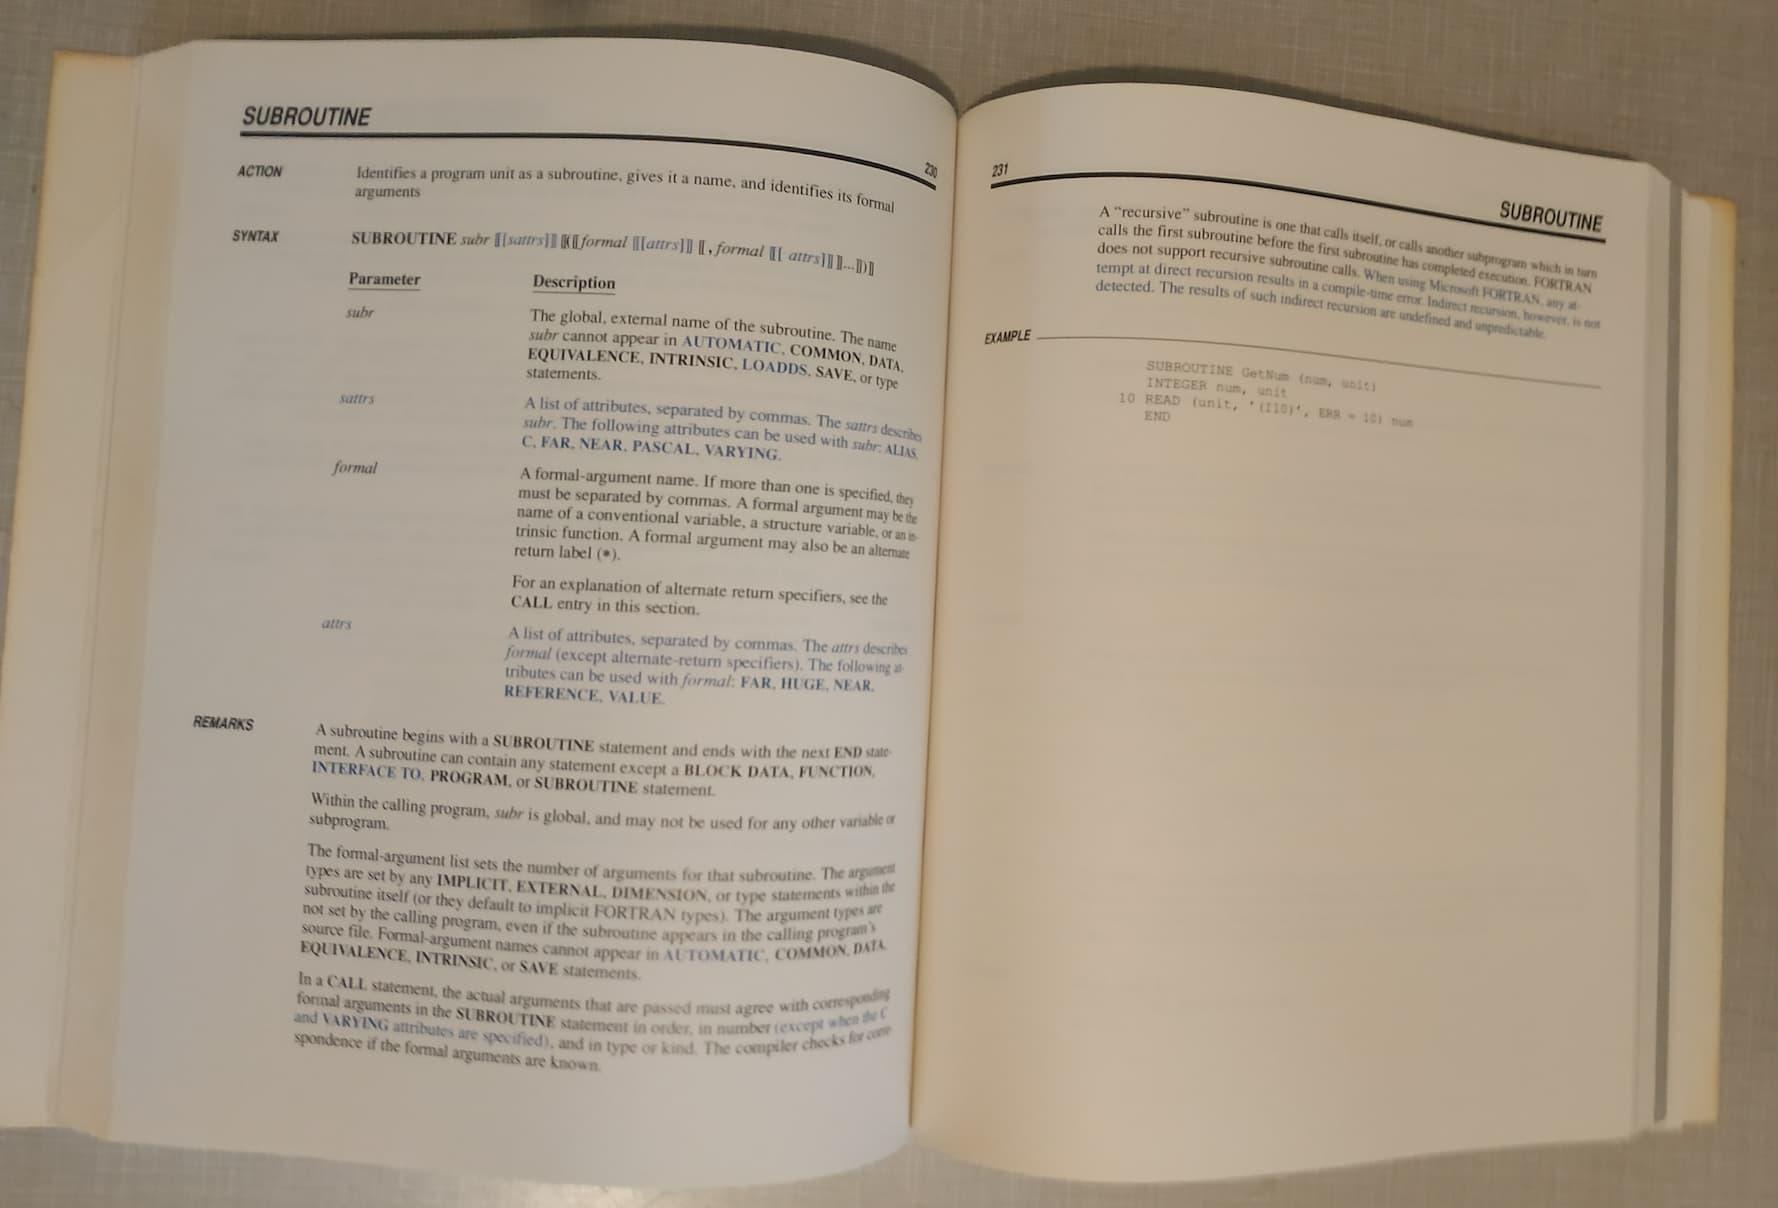 A reference page describing the SUBROUTINE keyword in Microsoft FORTRAN